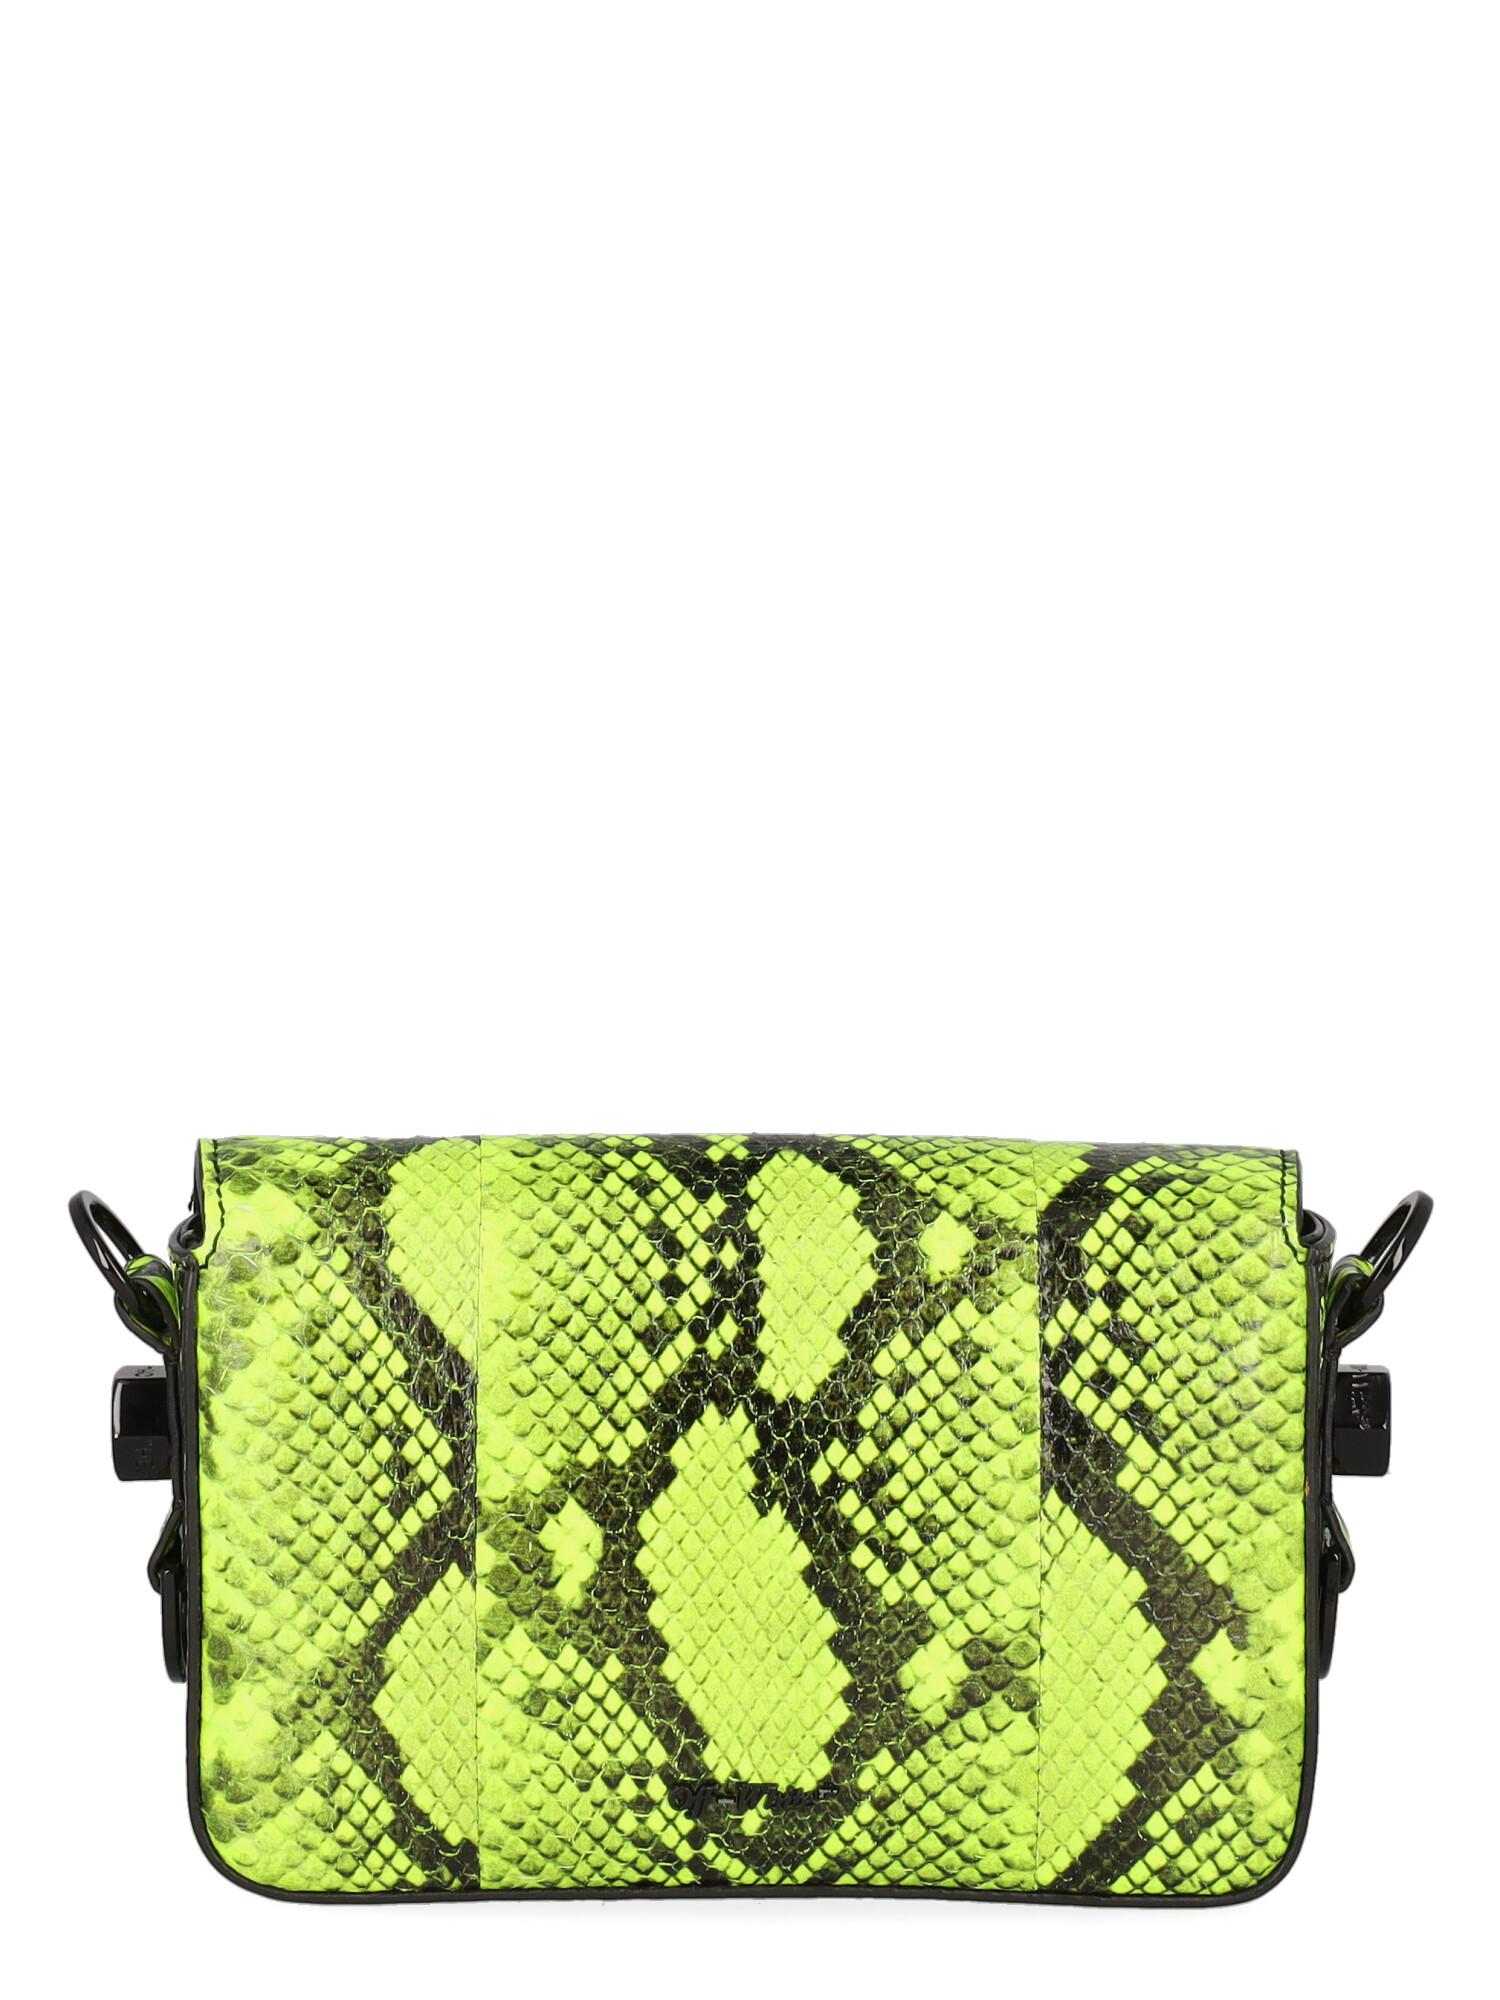 Off-White Women Shoulder bags Neon Leather  In Excellent Condition For Sale In Milan, IT